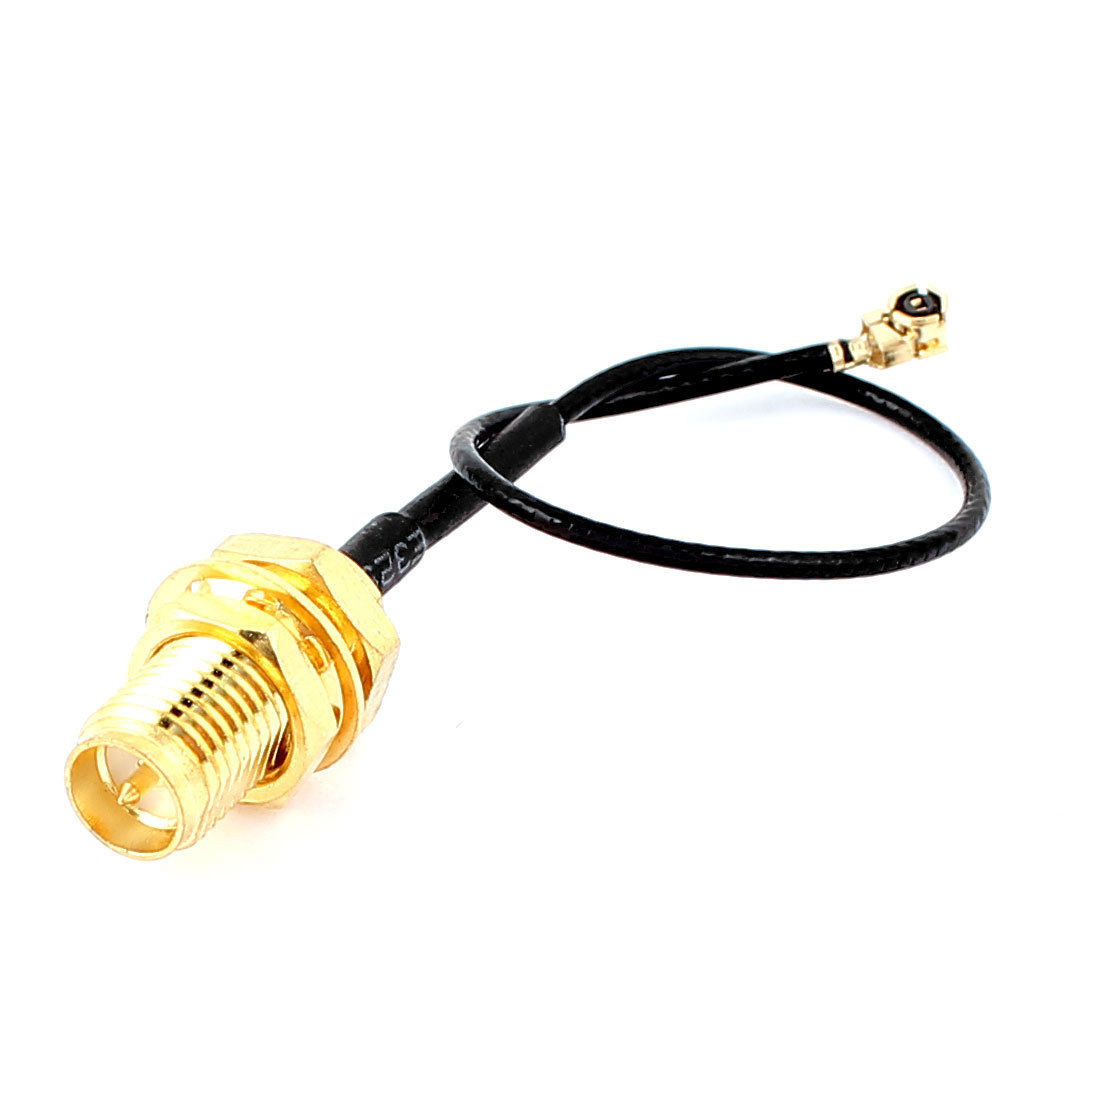 Best RF1.13 IPX to RP-SMA Male Antenna WiFi Pigtail Cable 10cm wholesale